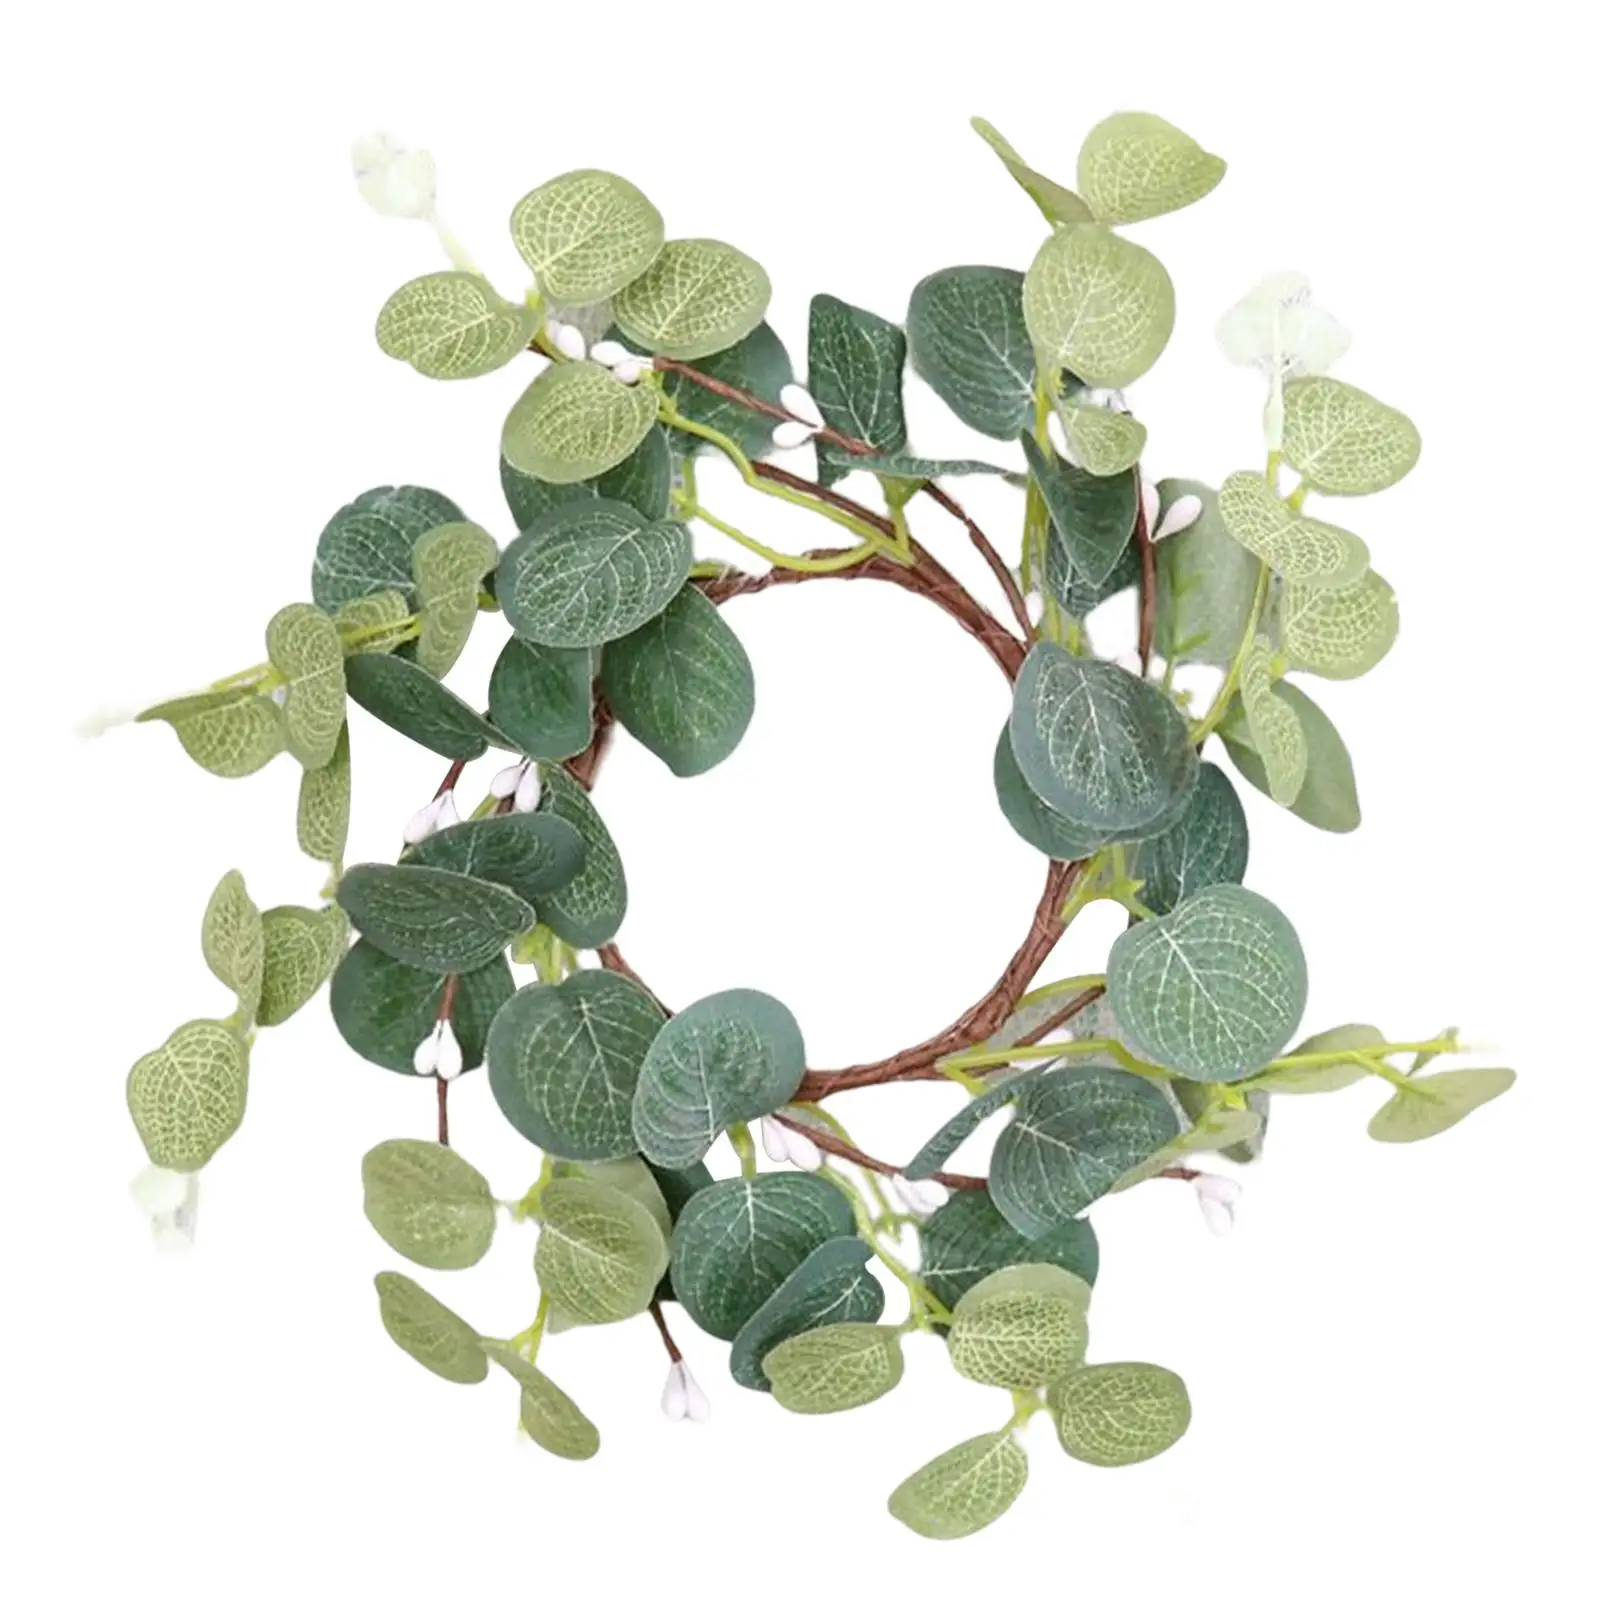 Artificial Easter Candle Wreath Centerpieces Eucalyptus Leaves Wreath Candlestick Candle Holder Wreath for Farmhouse Wall Decor